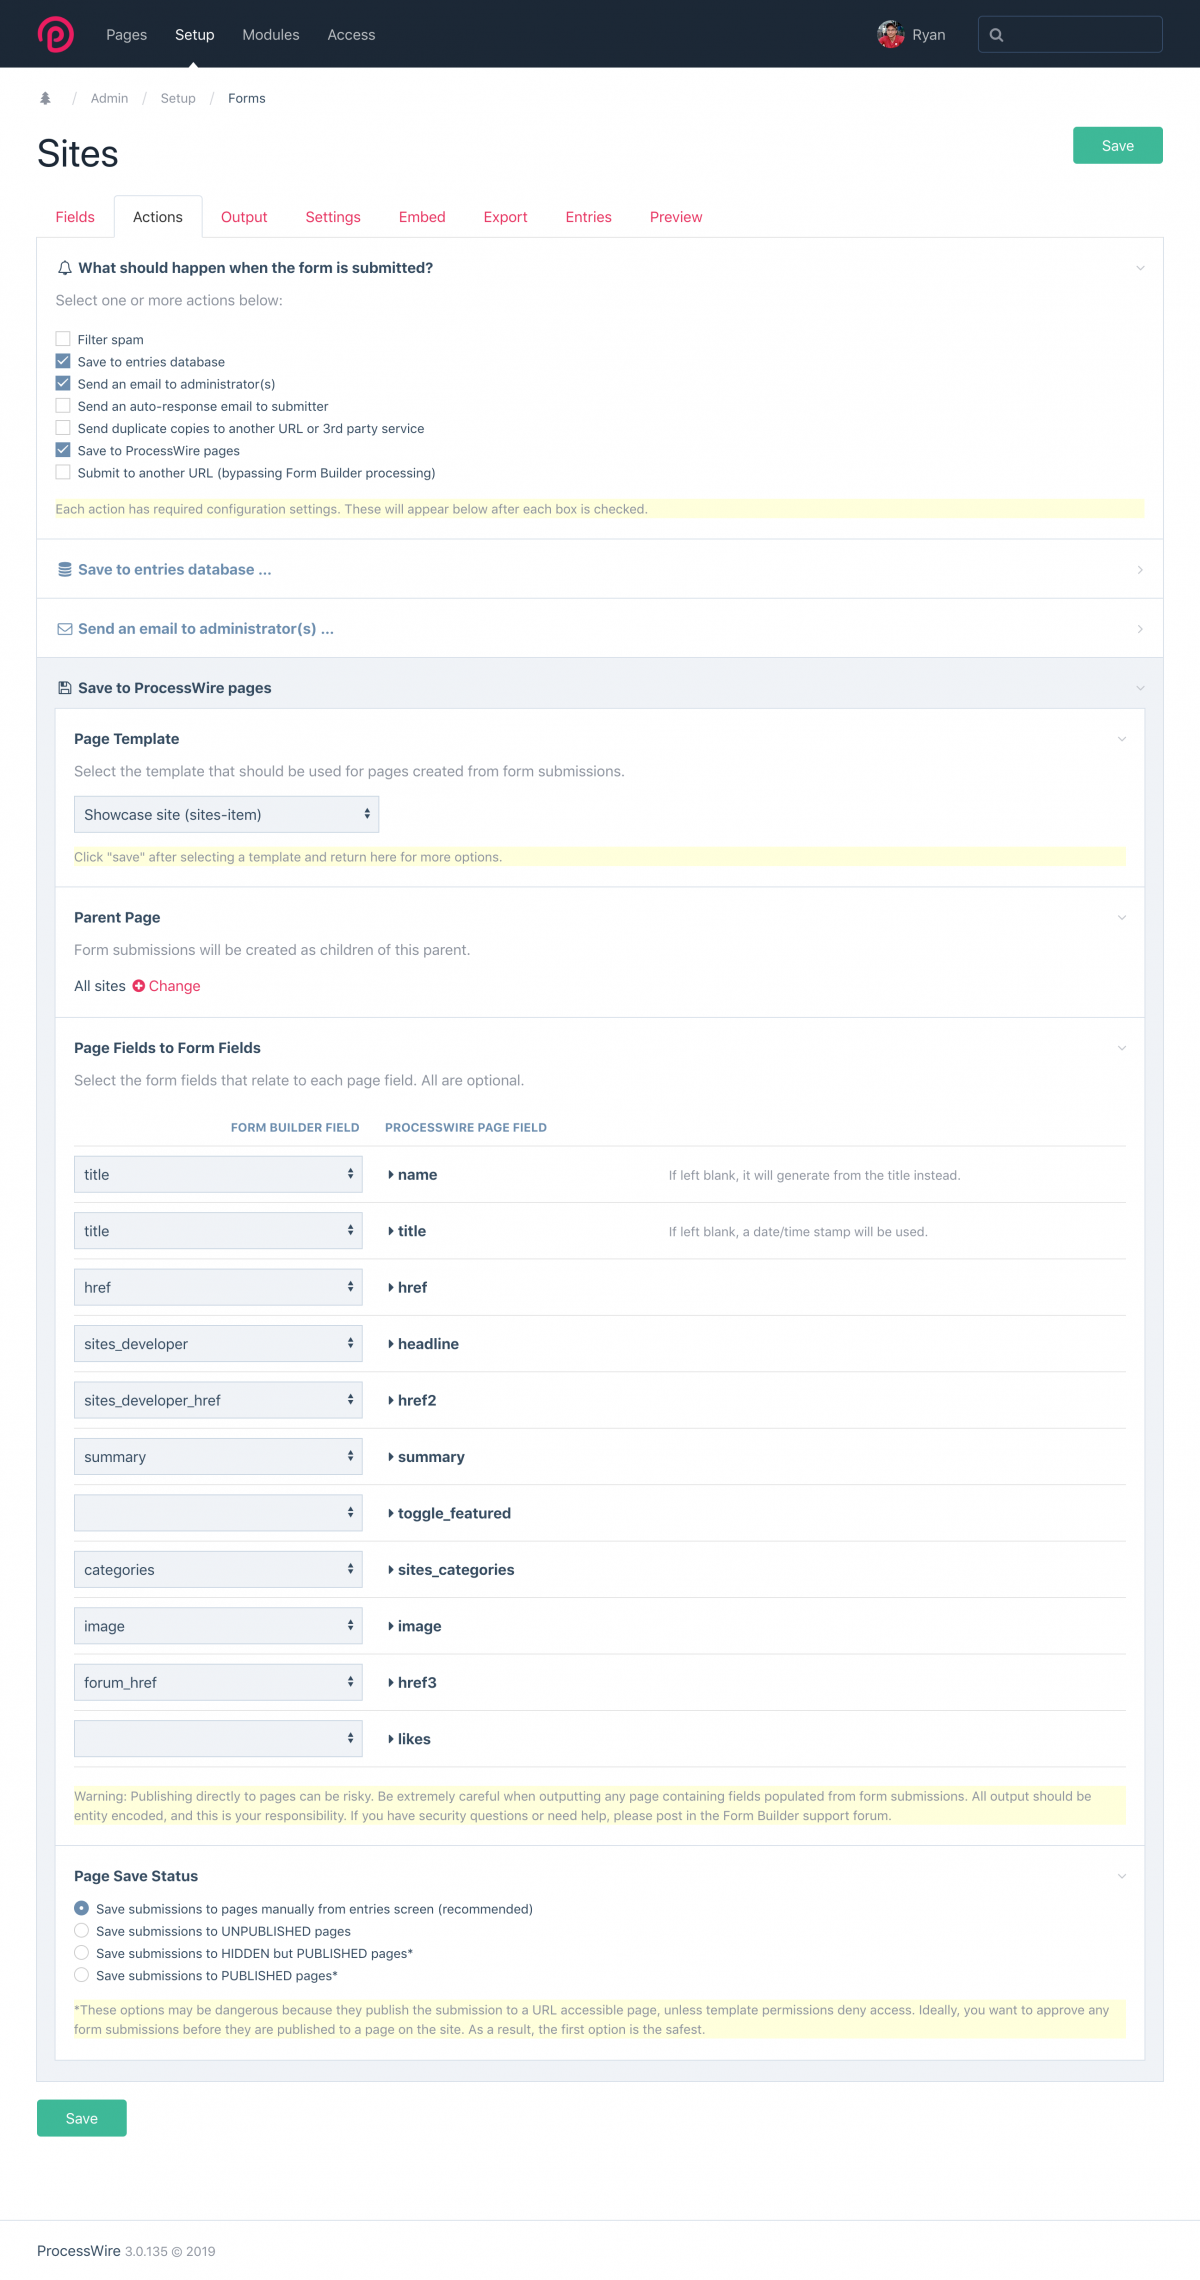 Configuring the optional Save-to-Pages action in FormBuilder on the Actions tab.